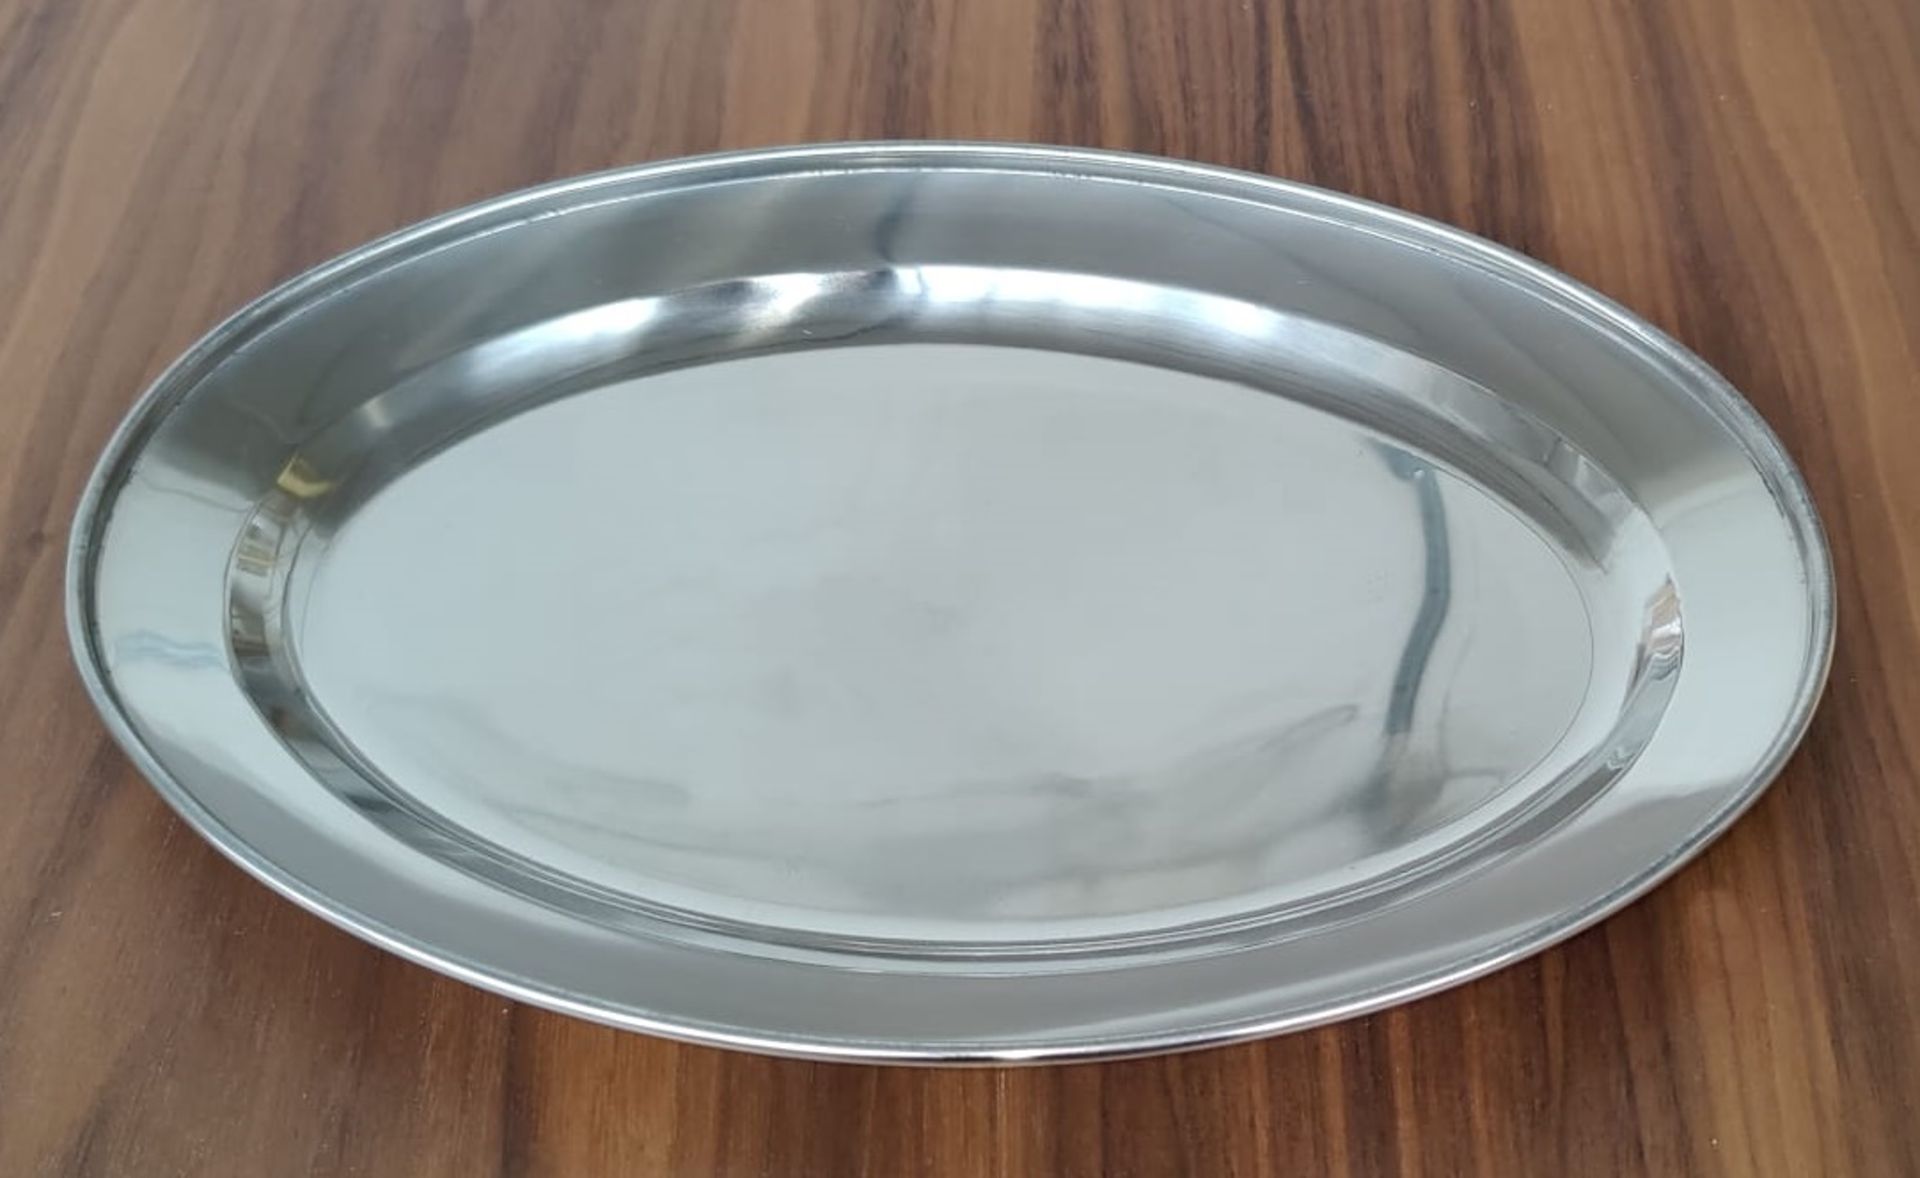 18 x Stainless Steel Small Oval Service Trays - Size: 255mm x 180mm - Brand New Boxed Stock RRP £90 - Image 6 of 7